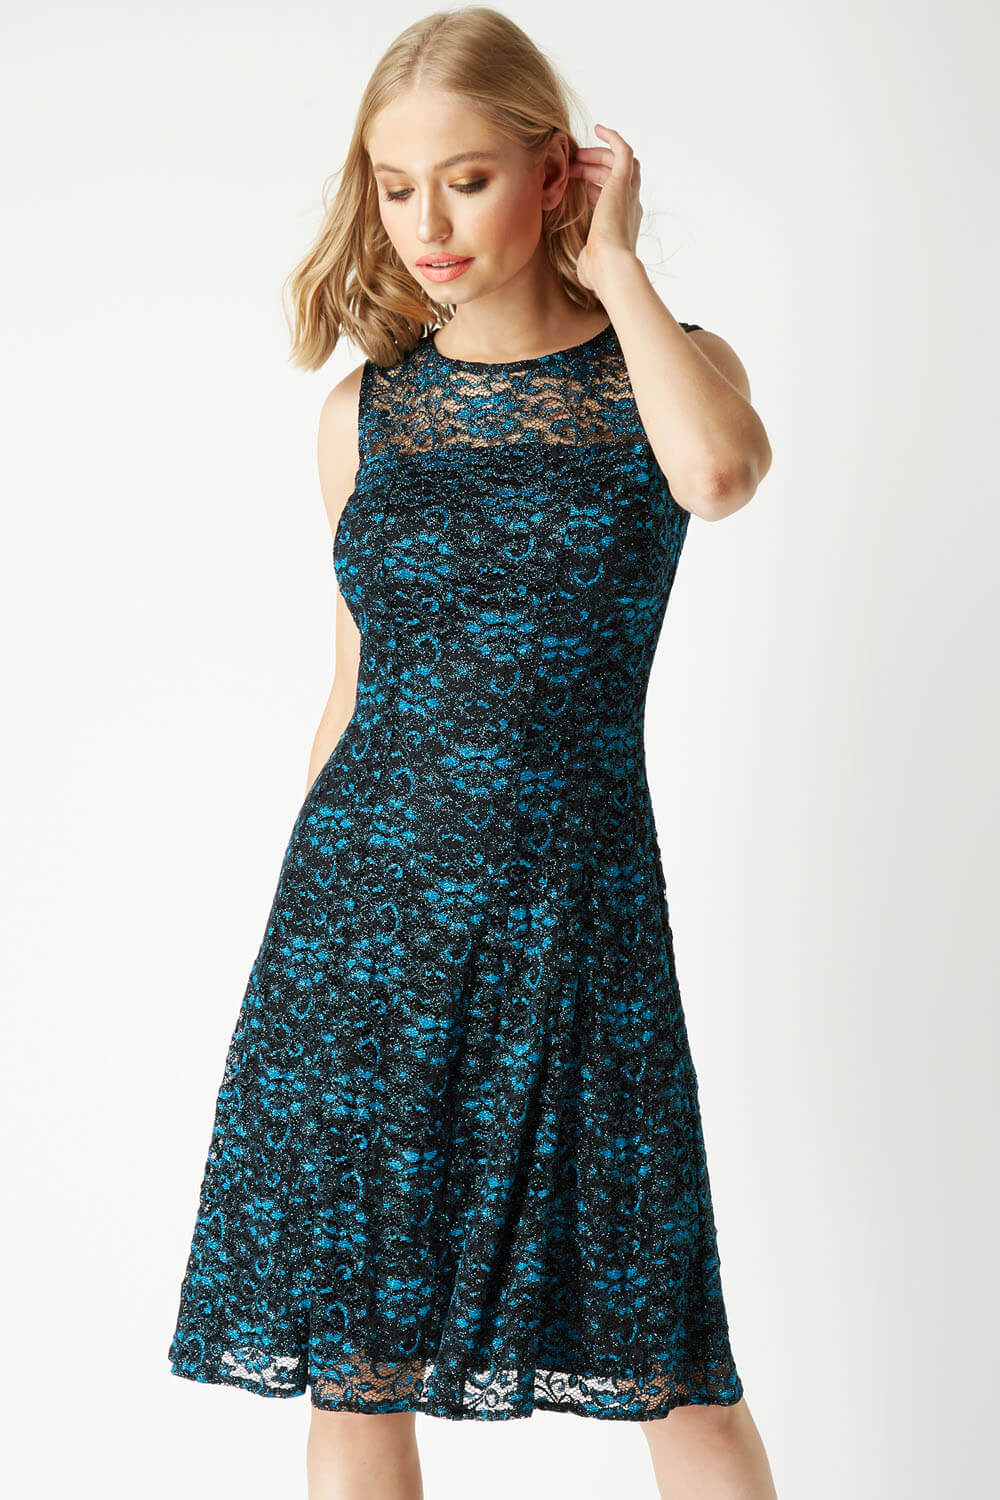 Shimmer Lace Fit and Flare Dress